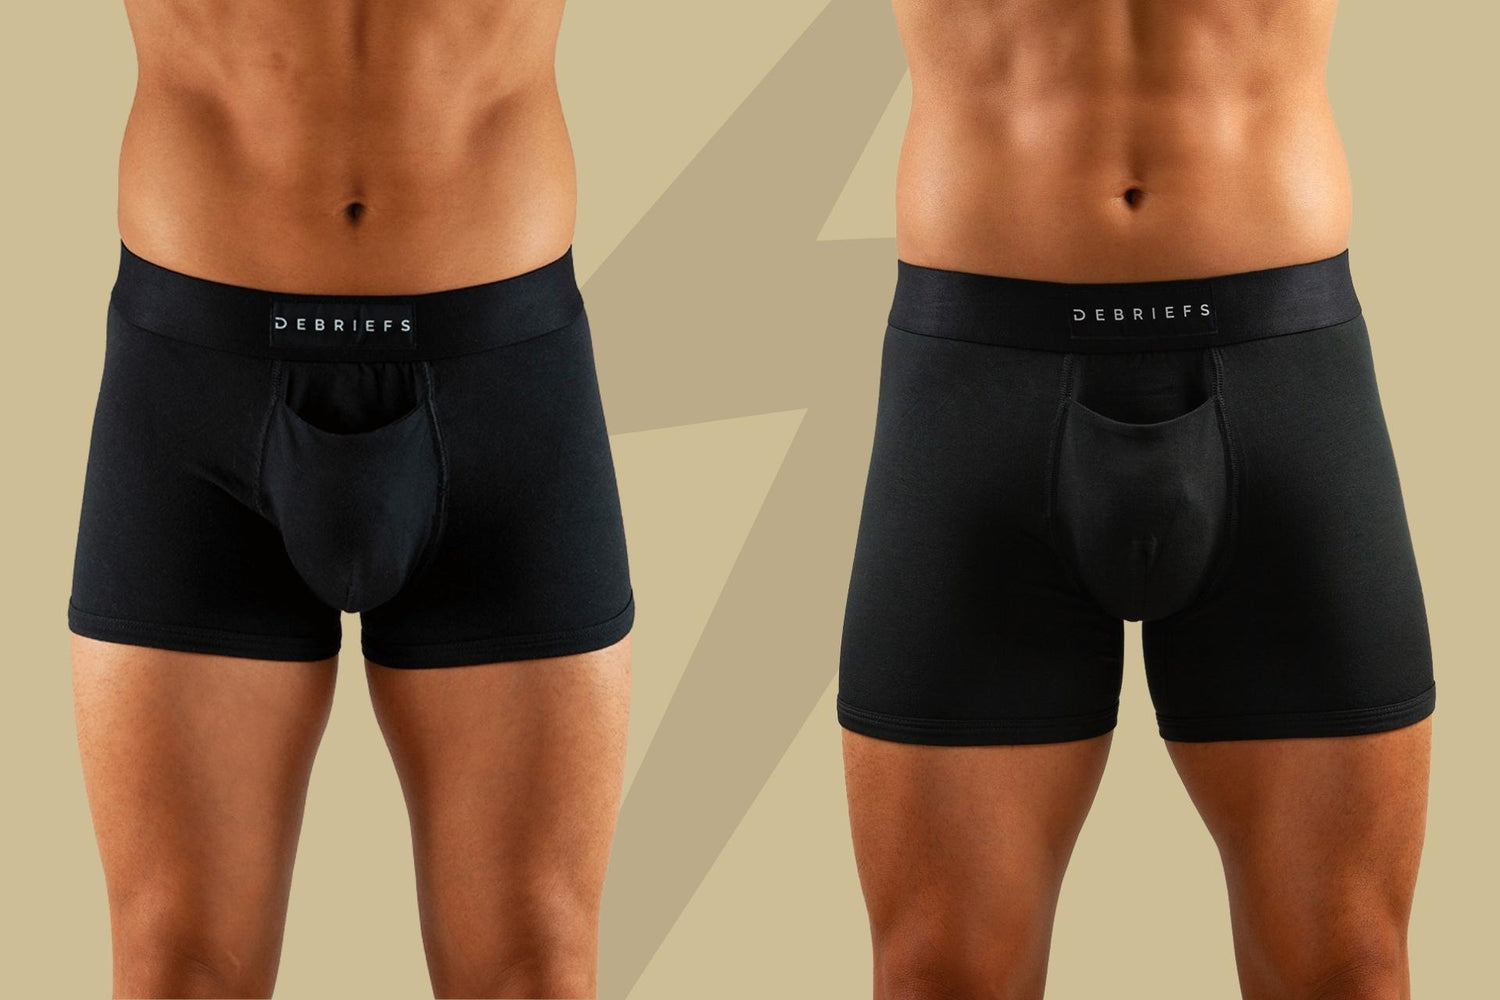 Men's Underwear Styles Explained: What You Need to Know